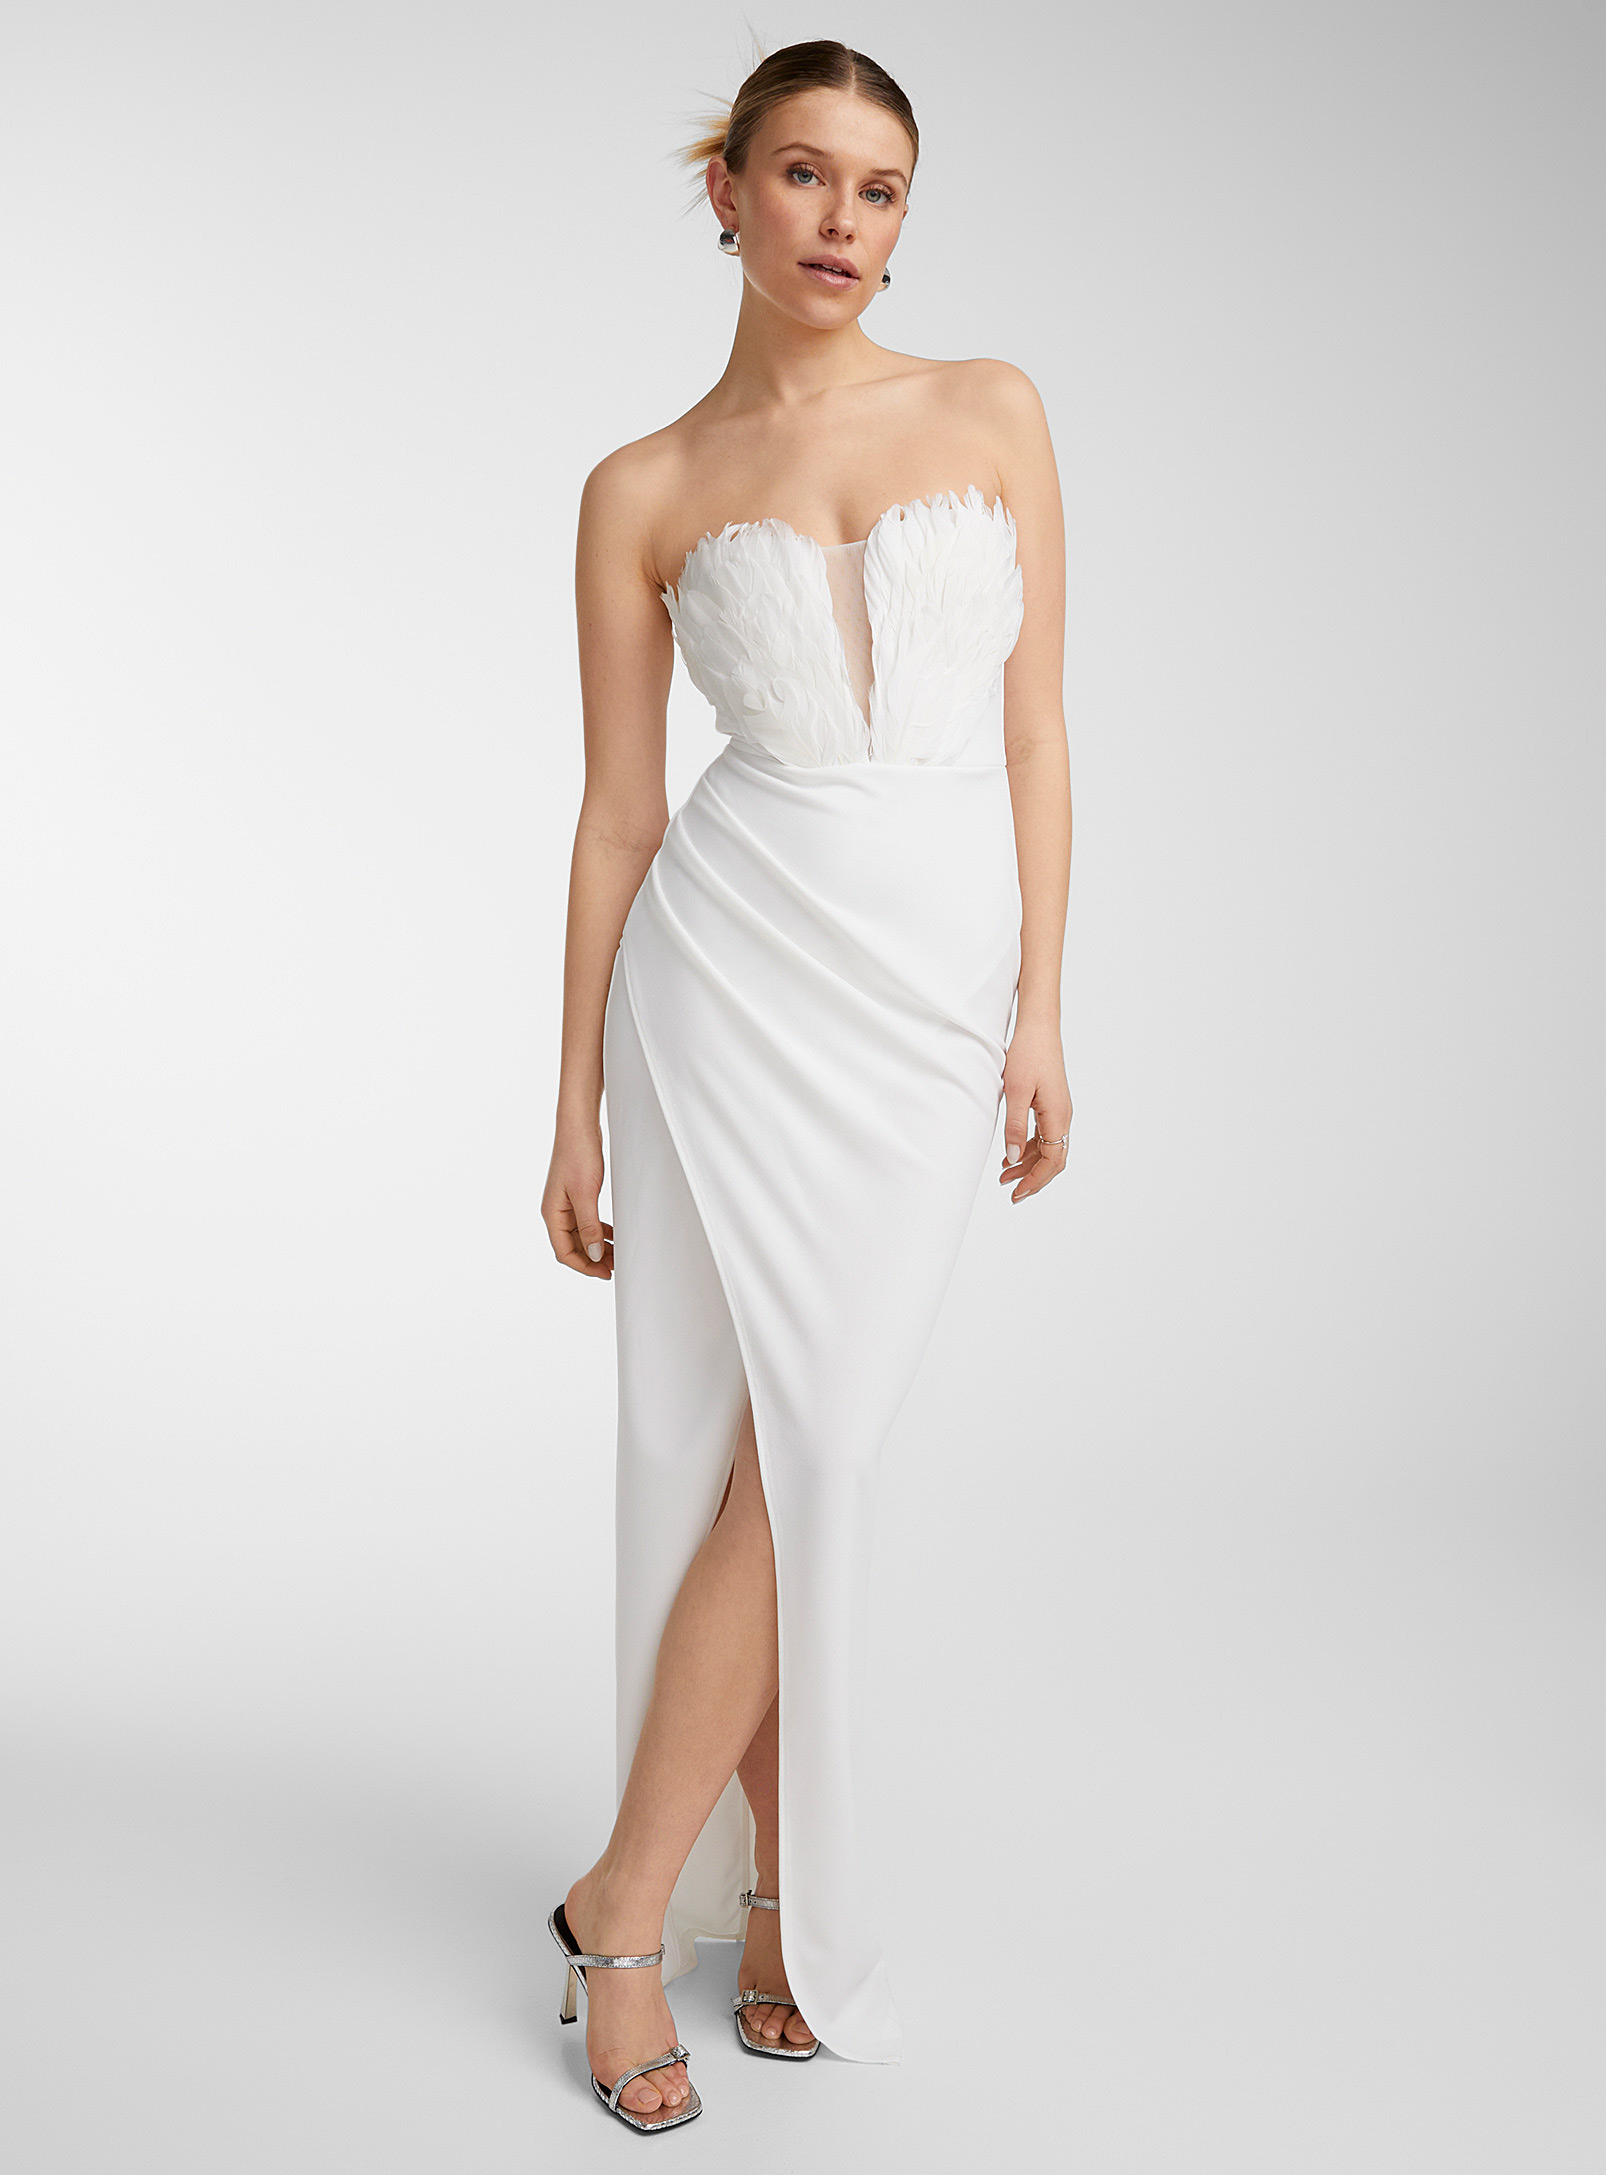 Icone Feathered Bustier Long White Dress